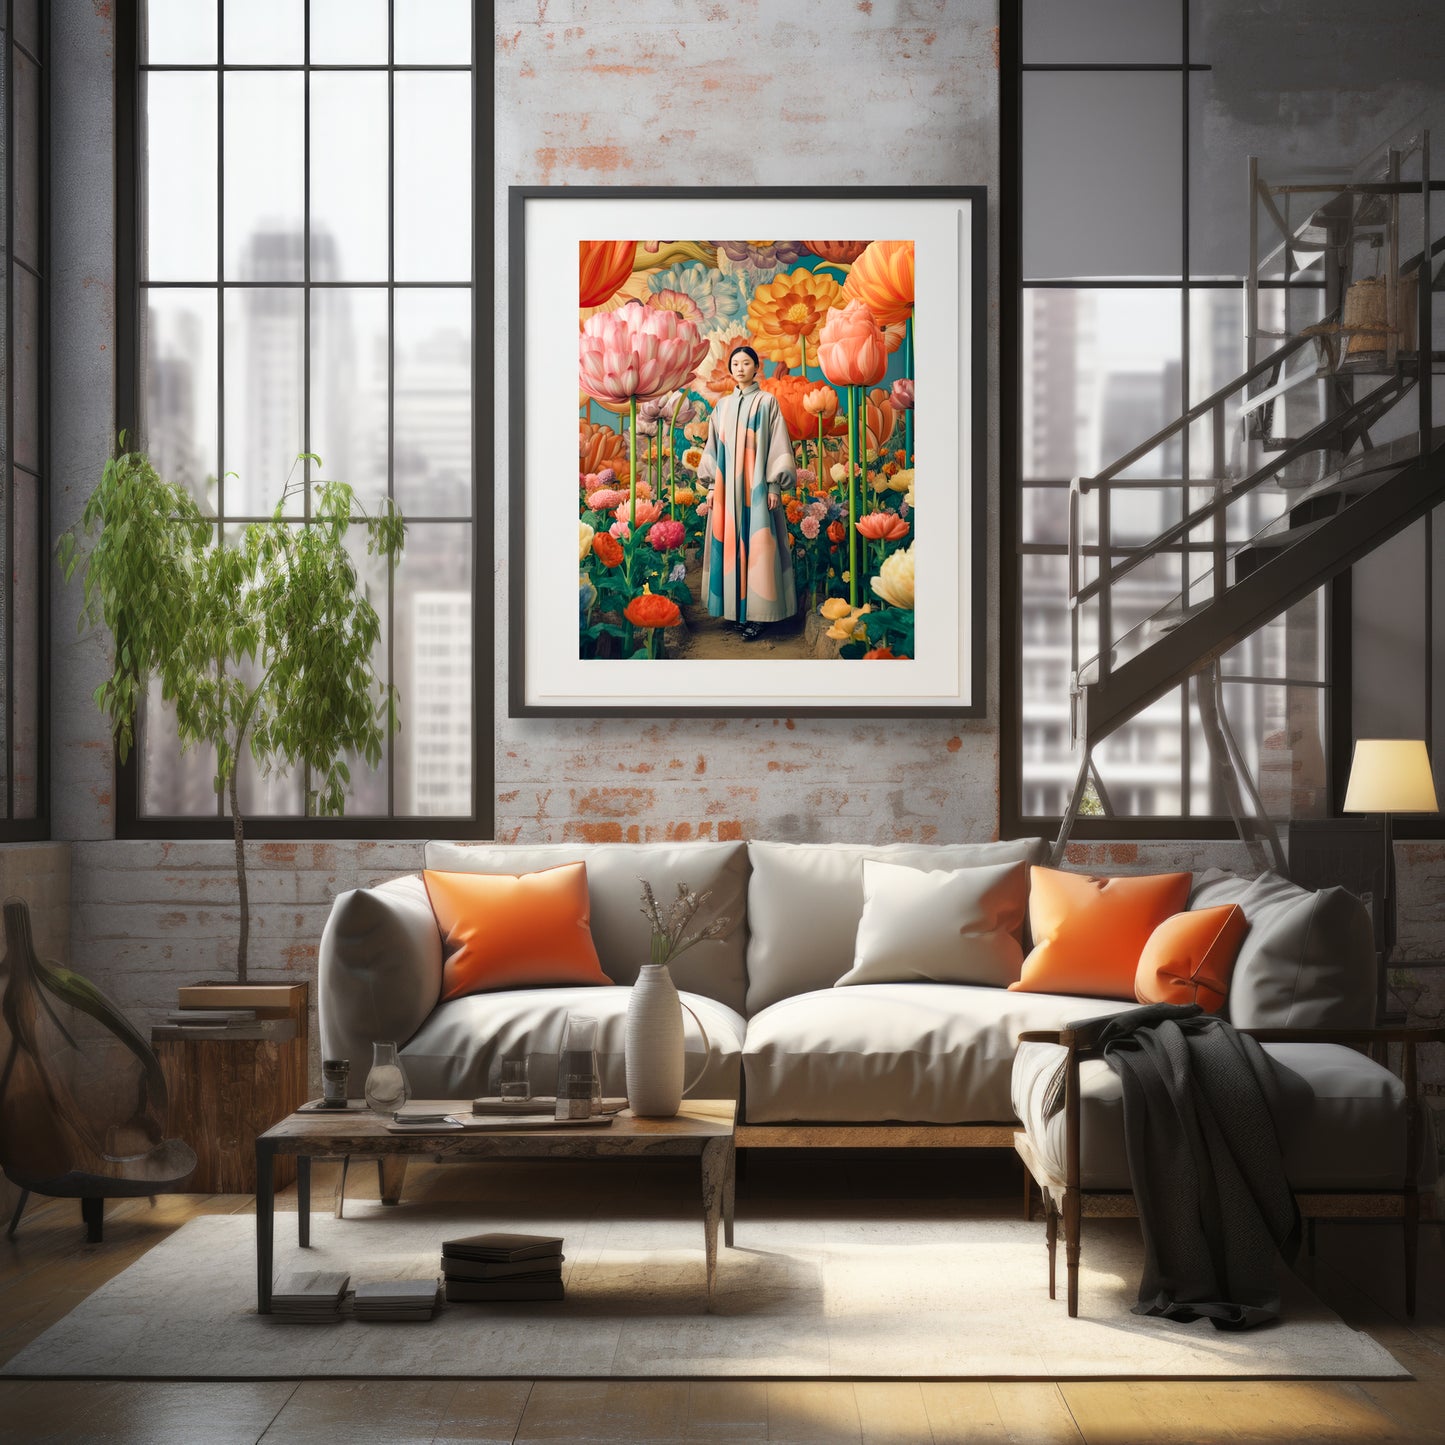 Artwork print featuring a woman in a vibrant garden of oversized flowers, creating a whimsical and enchanting visual. This fine art print is a captivating visual fable.